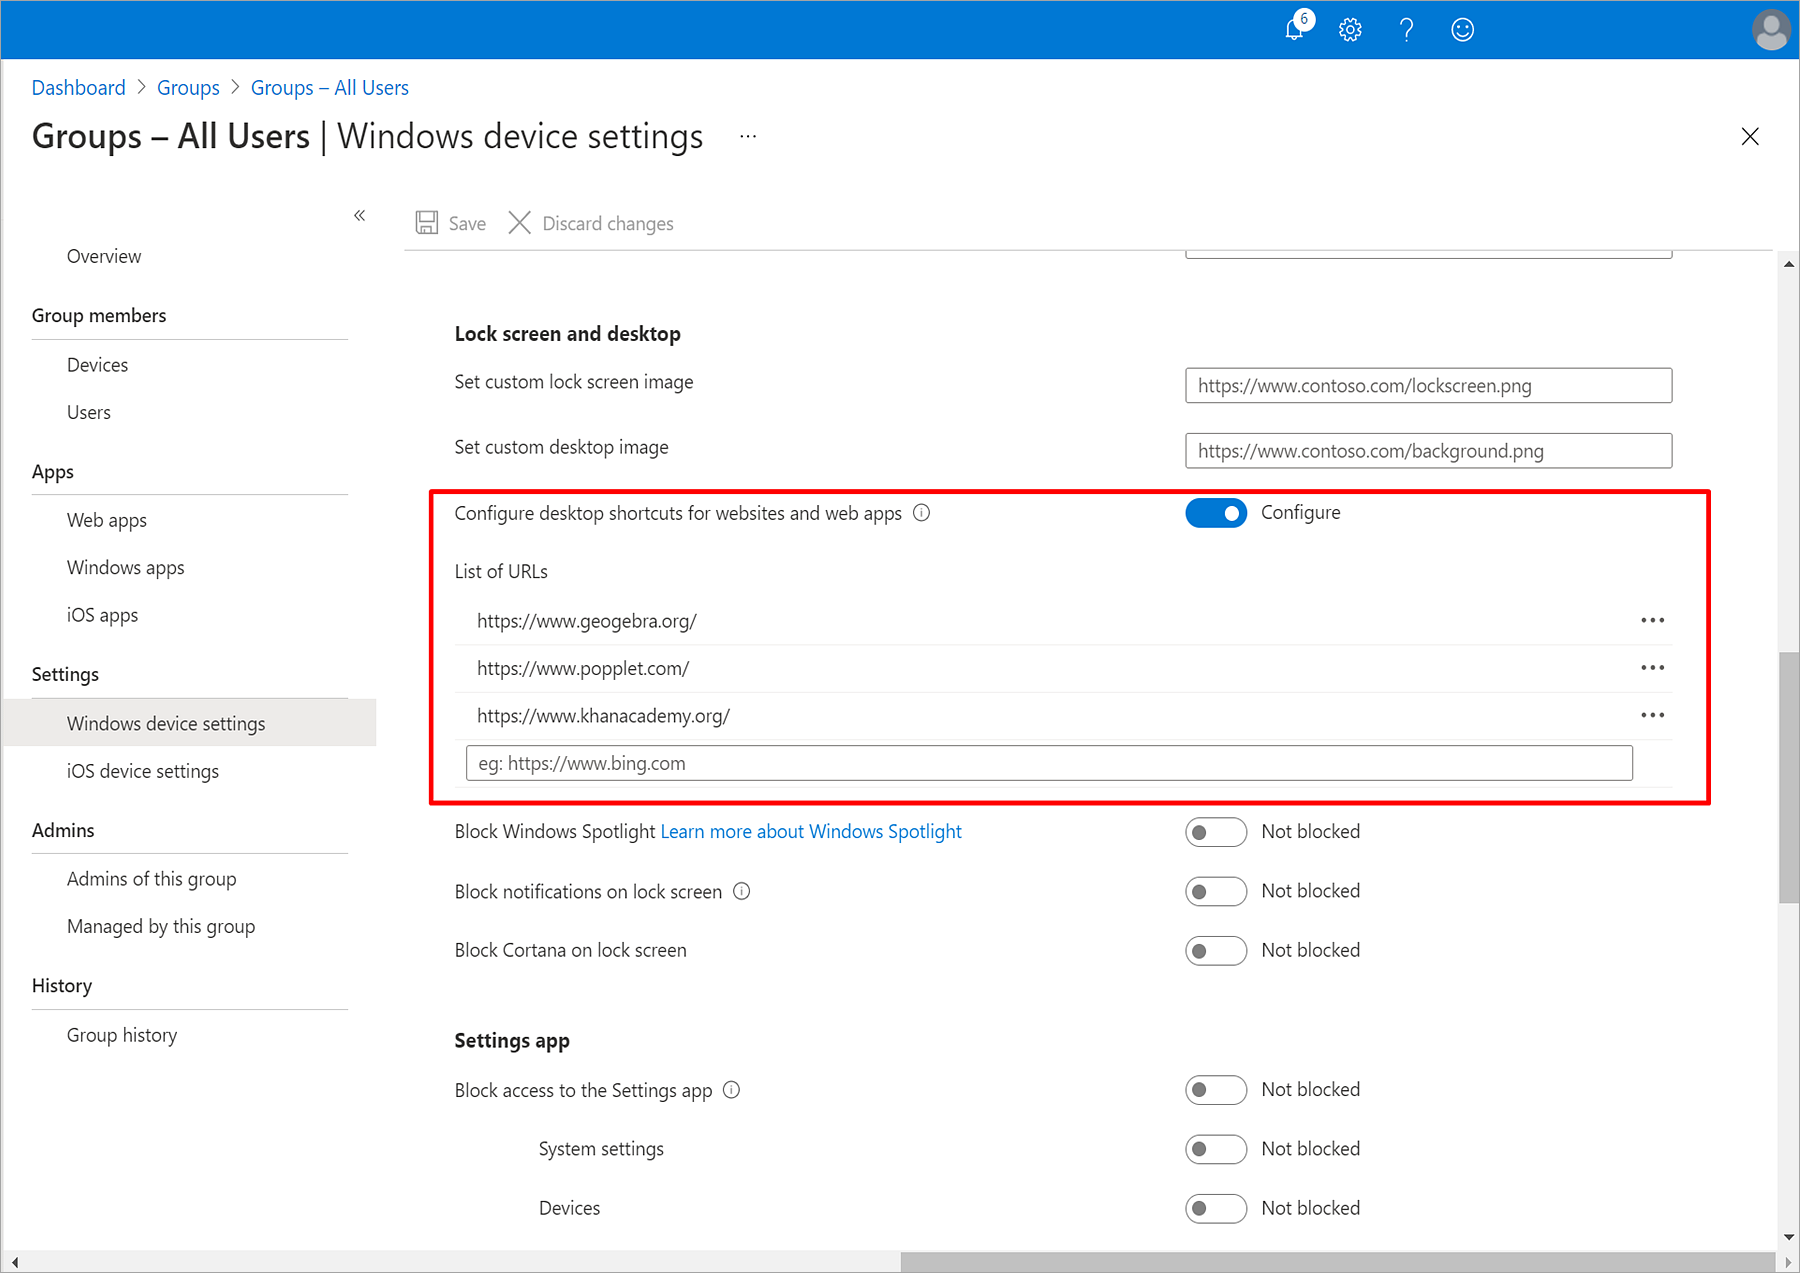 Screenshot of the Intune for Education Groups - All Users > Windows device settings page, highlighting a new setting Configure desktop shortcuts for websites and web apps and a list of URLs.